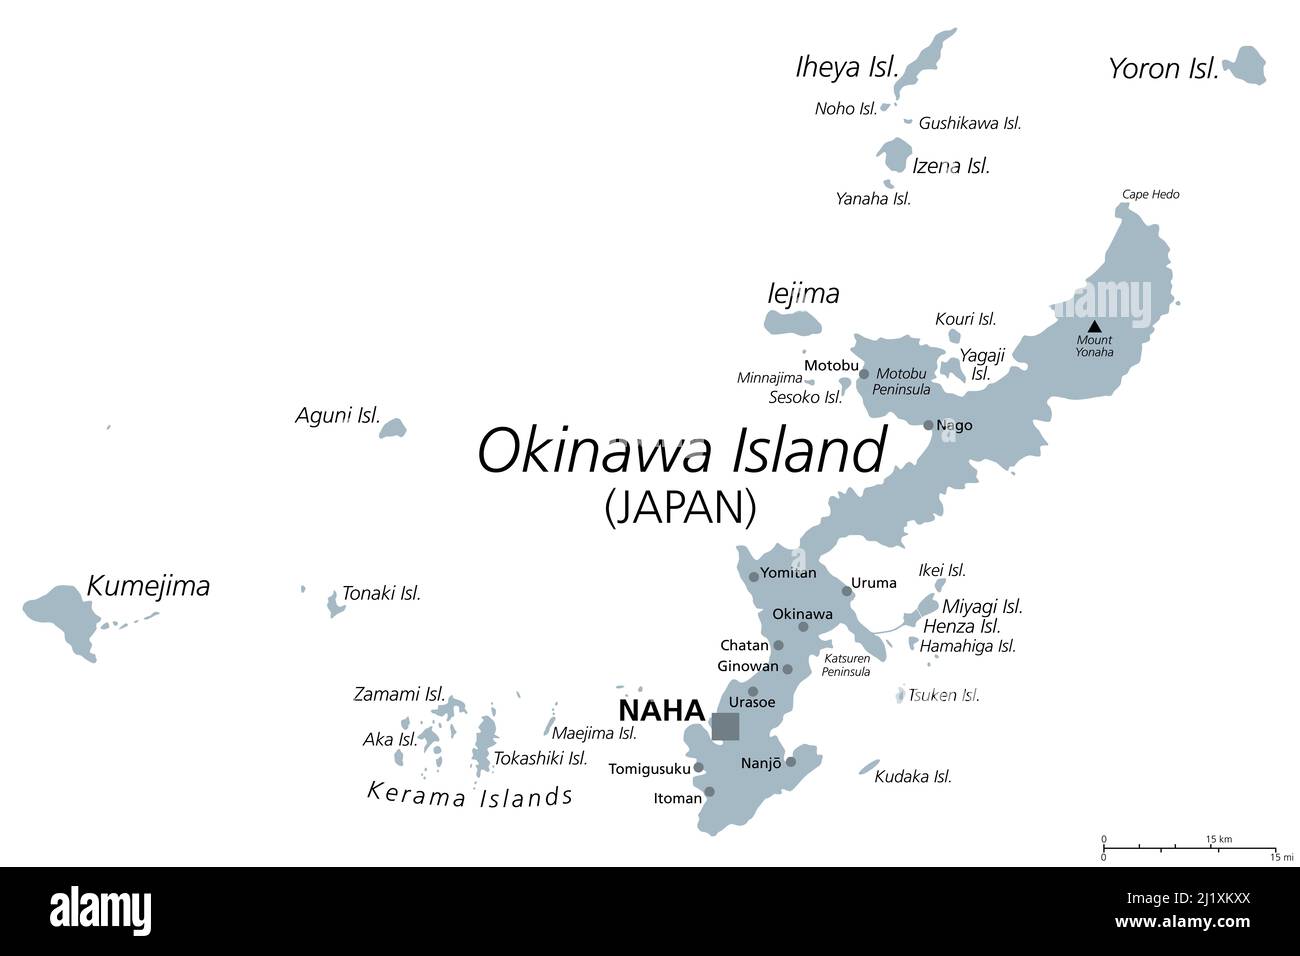 Okinawa Islands, gray political map. Island group in the Okinawa Prefecture of Japan, in the East China Sea, with the capital Naha. Stock Photo